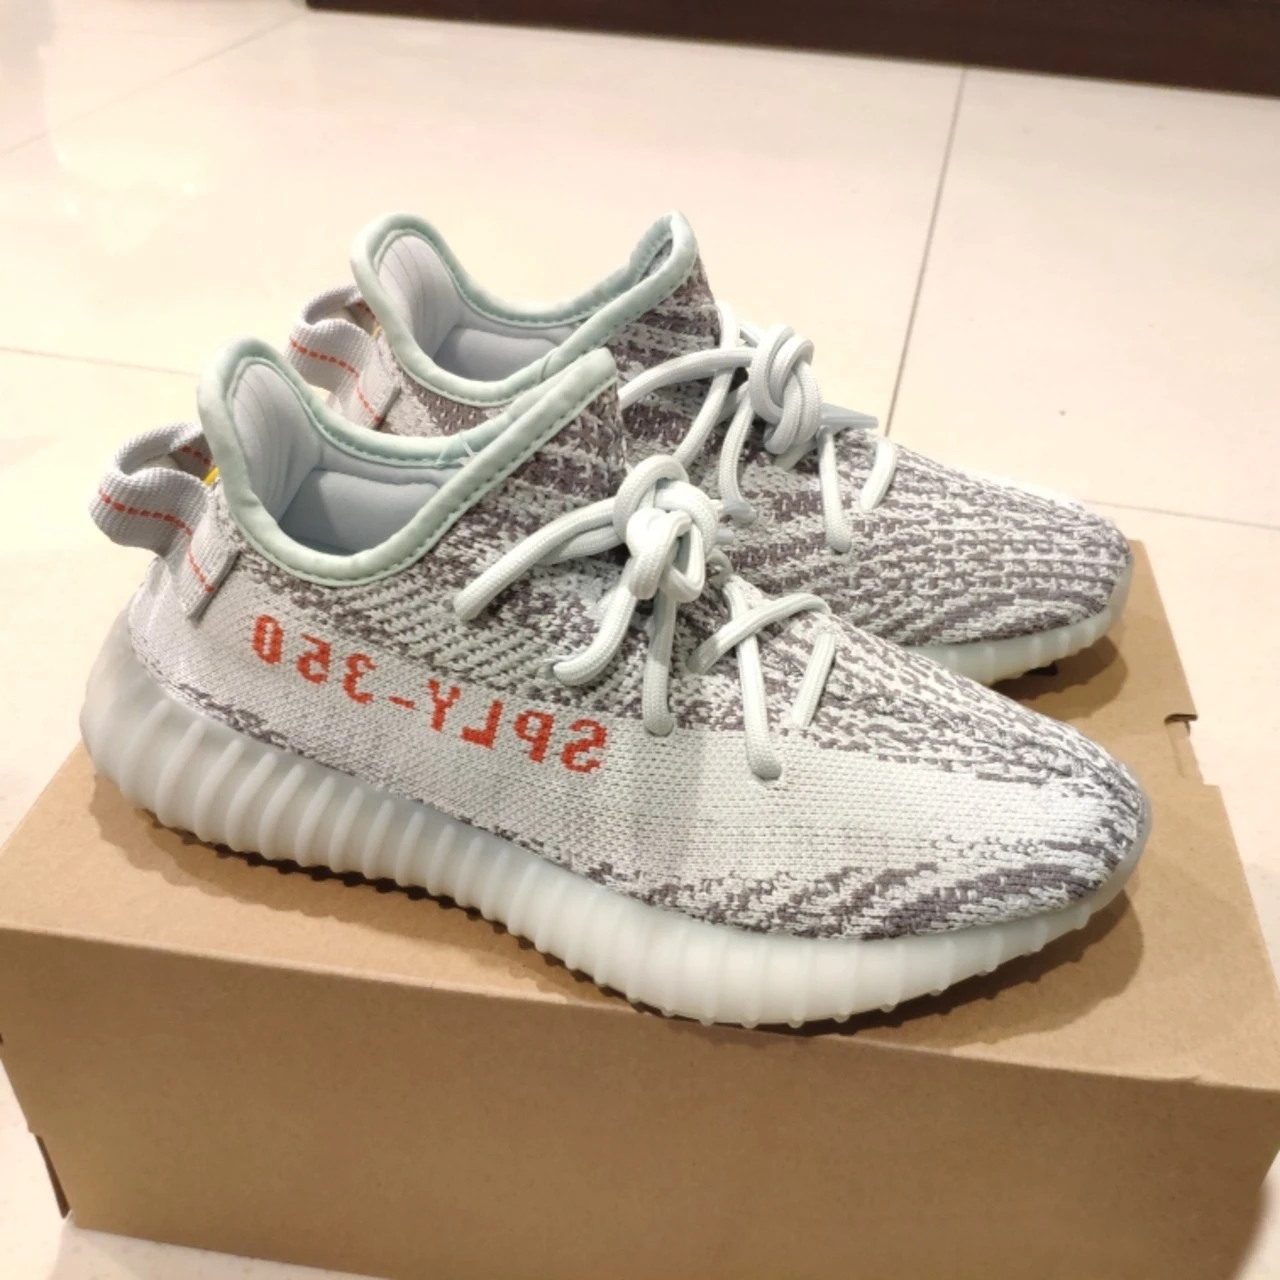 

2020 Fakees Suppliers Dropshipping Real Black Yeezy 350 V2 Men Women Custom Oem Child Lace Casual Running Sneakers Sport Shoes, Pantone color is available